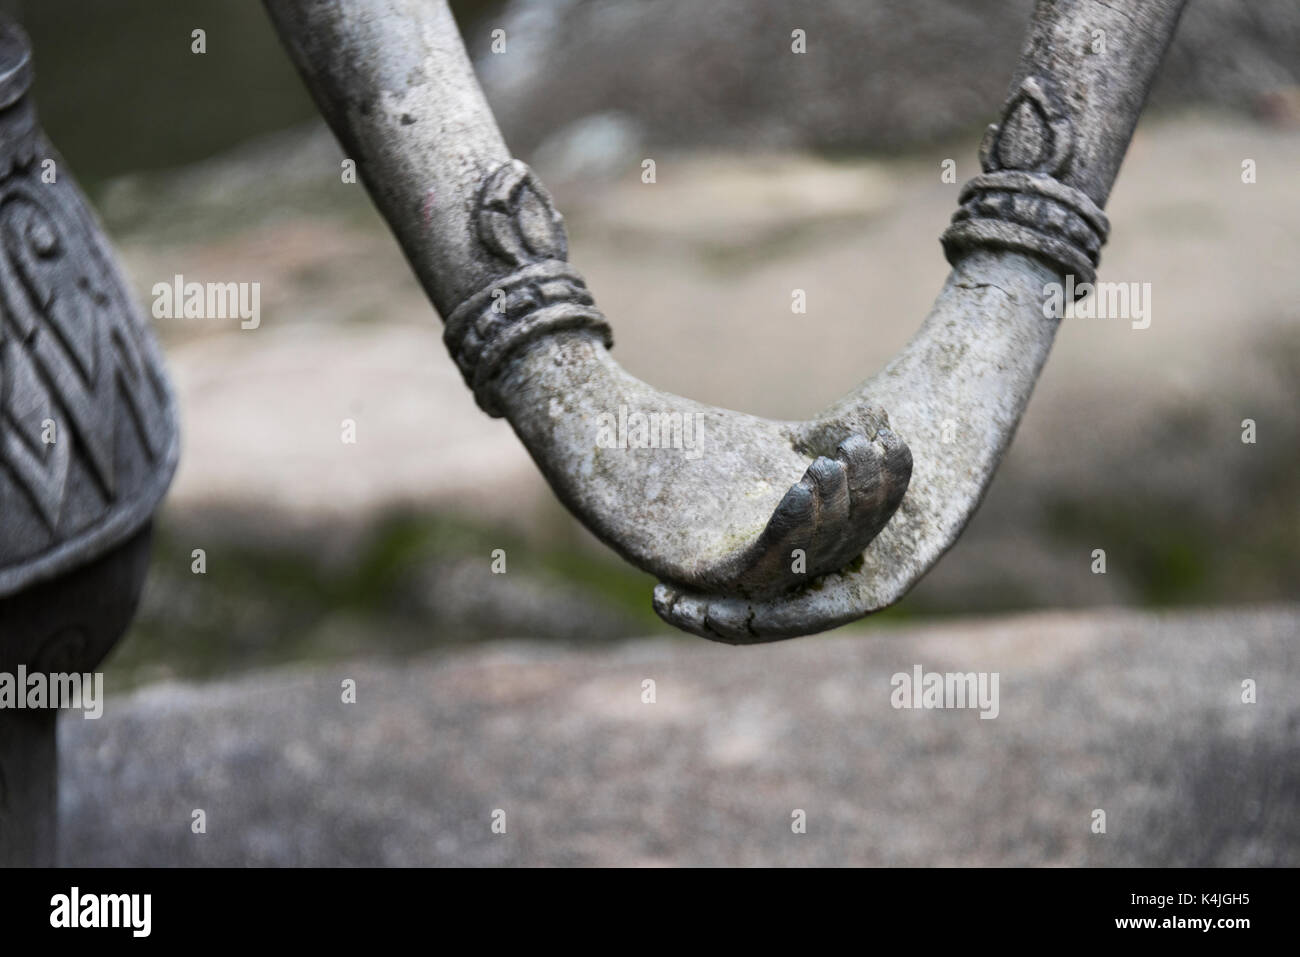 Close-up of hands of statues in Heaven's Garden, Koh Samui, Surat Thani Province, Thailand Stock Photo